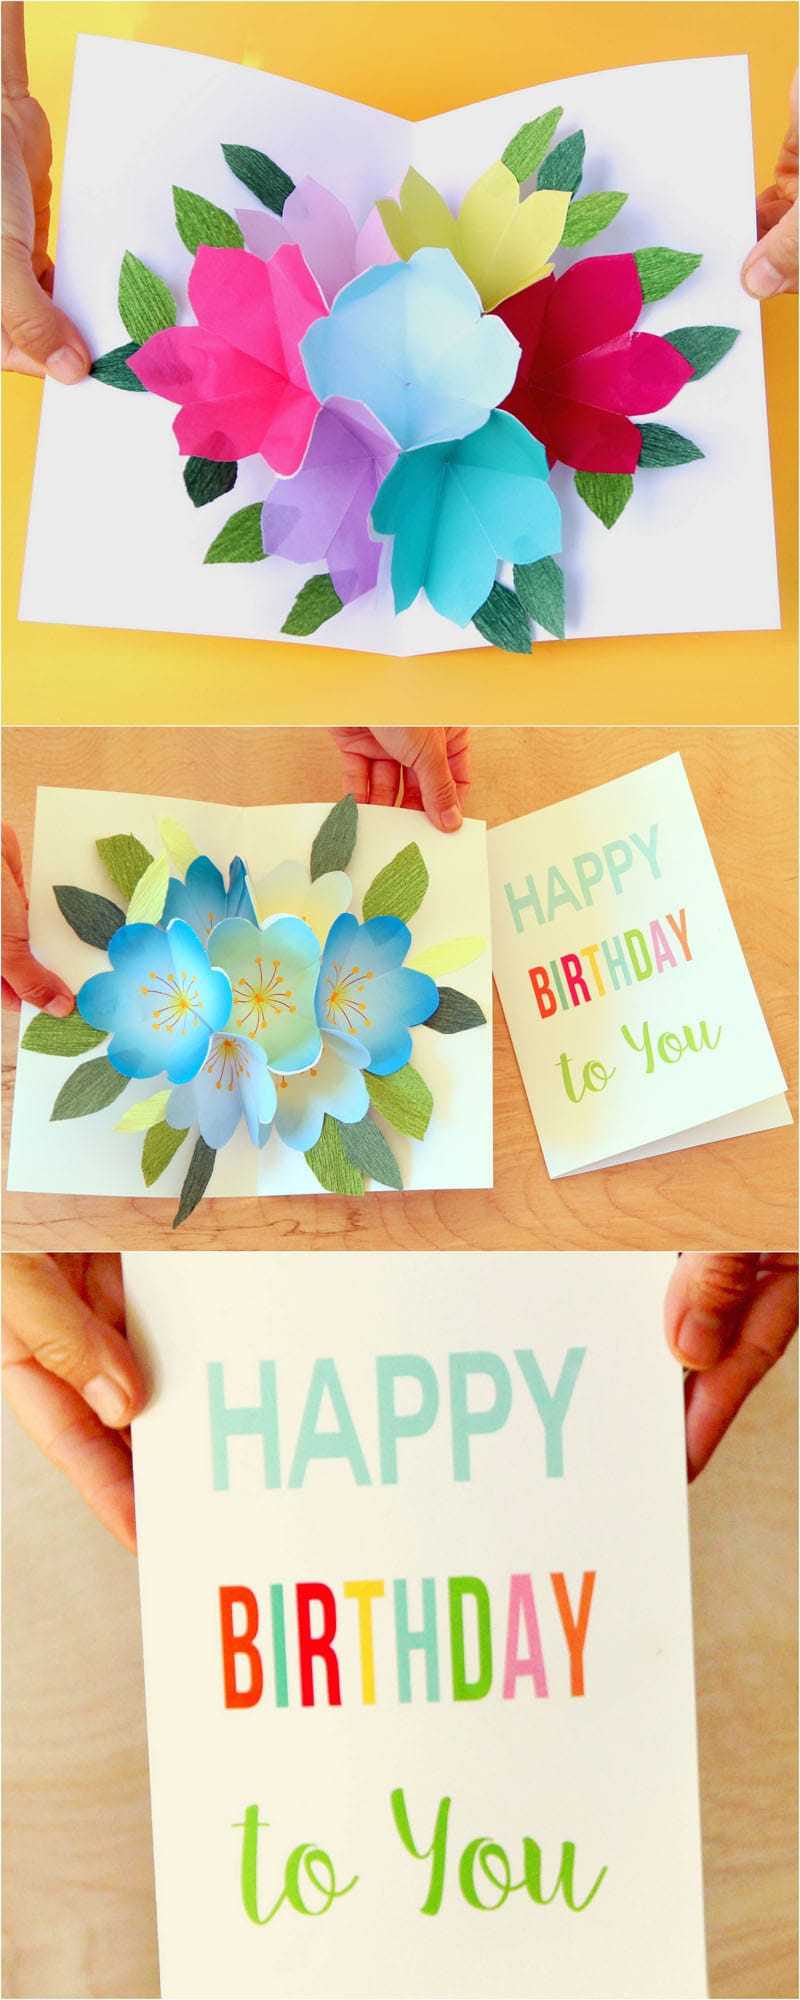 Free Printable Happy Birthday Card With Pop Up Bouquet – A In Happy Birthday Pop Up Card Free Template